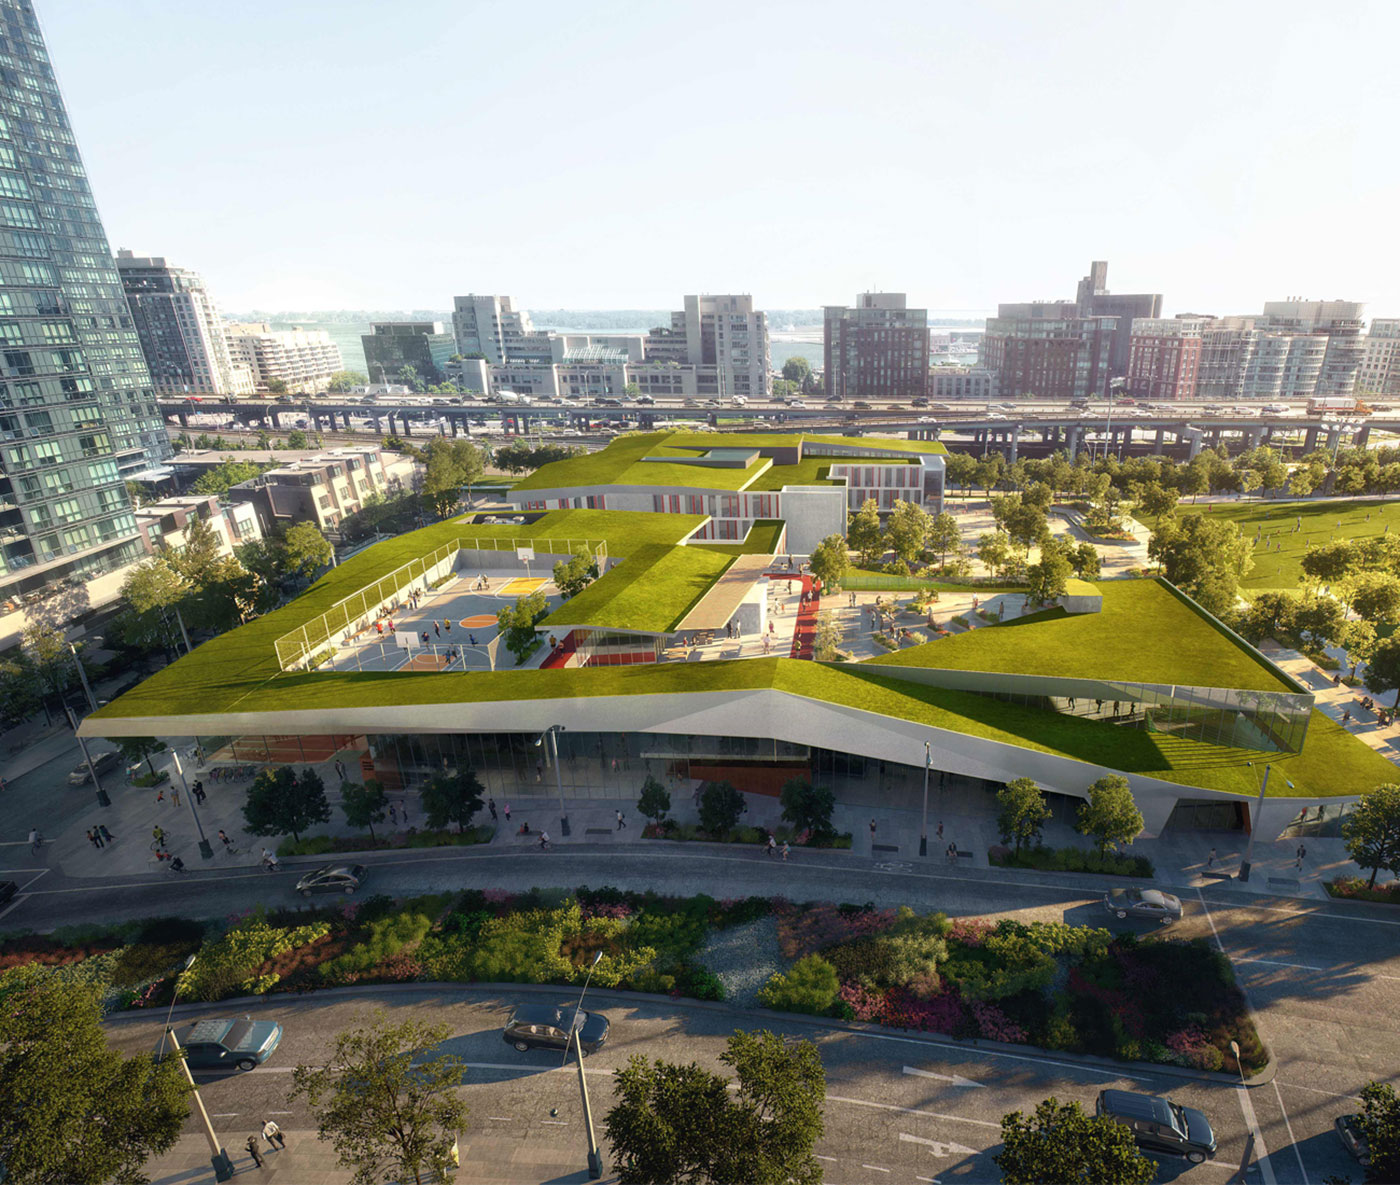 Topped with a green roof that houses a basketball court and running track, the sloped facilities echo the hilly terrain of the adjacent Canoe Landing Park.